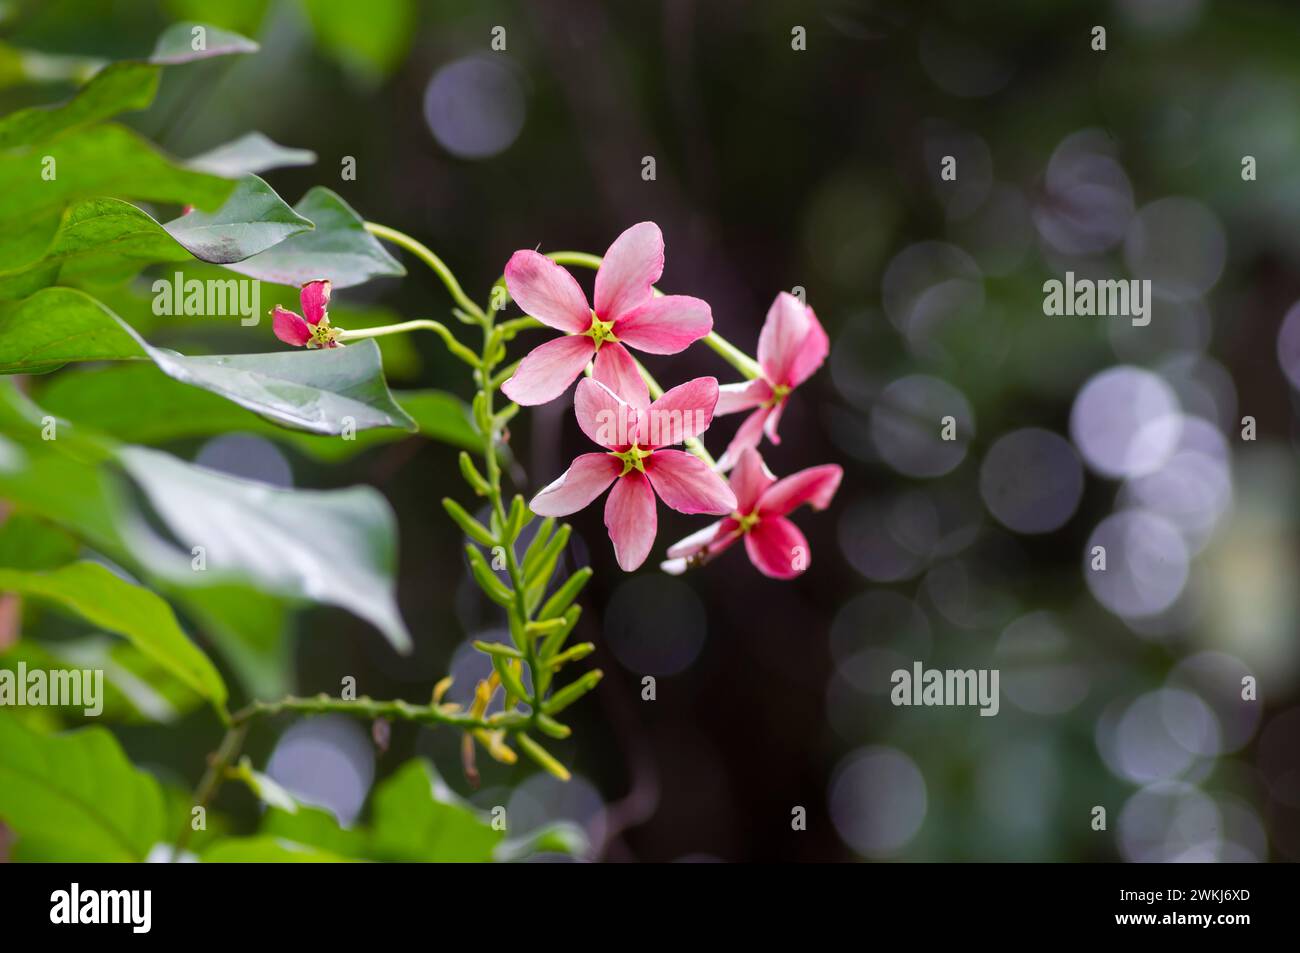 Blooming of Combretum indicum, Rangoon creeper flowers, with bokeh background. Stock Photo